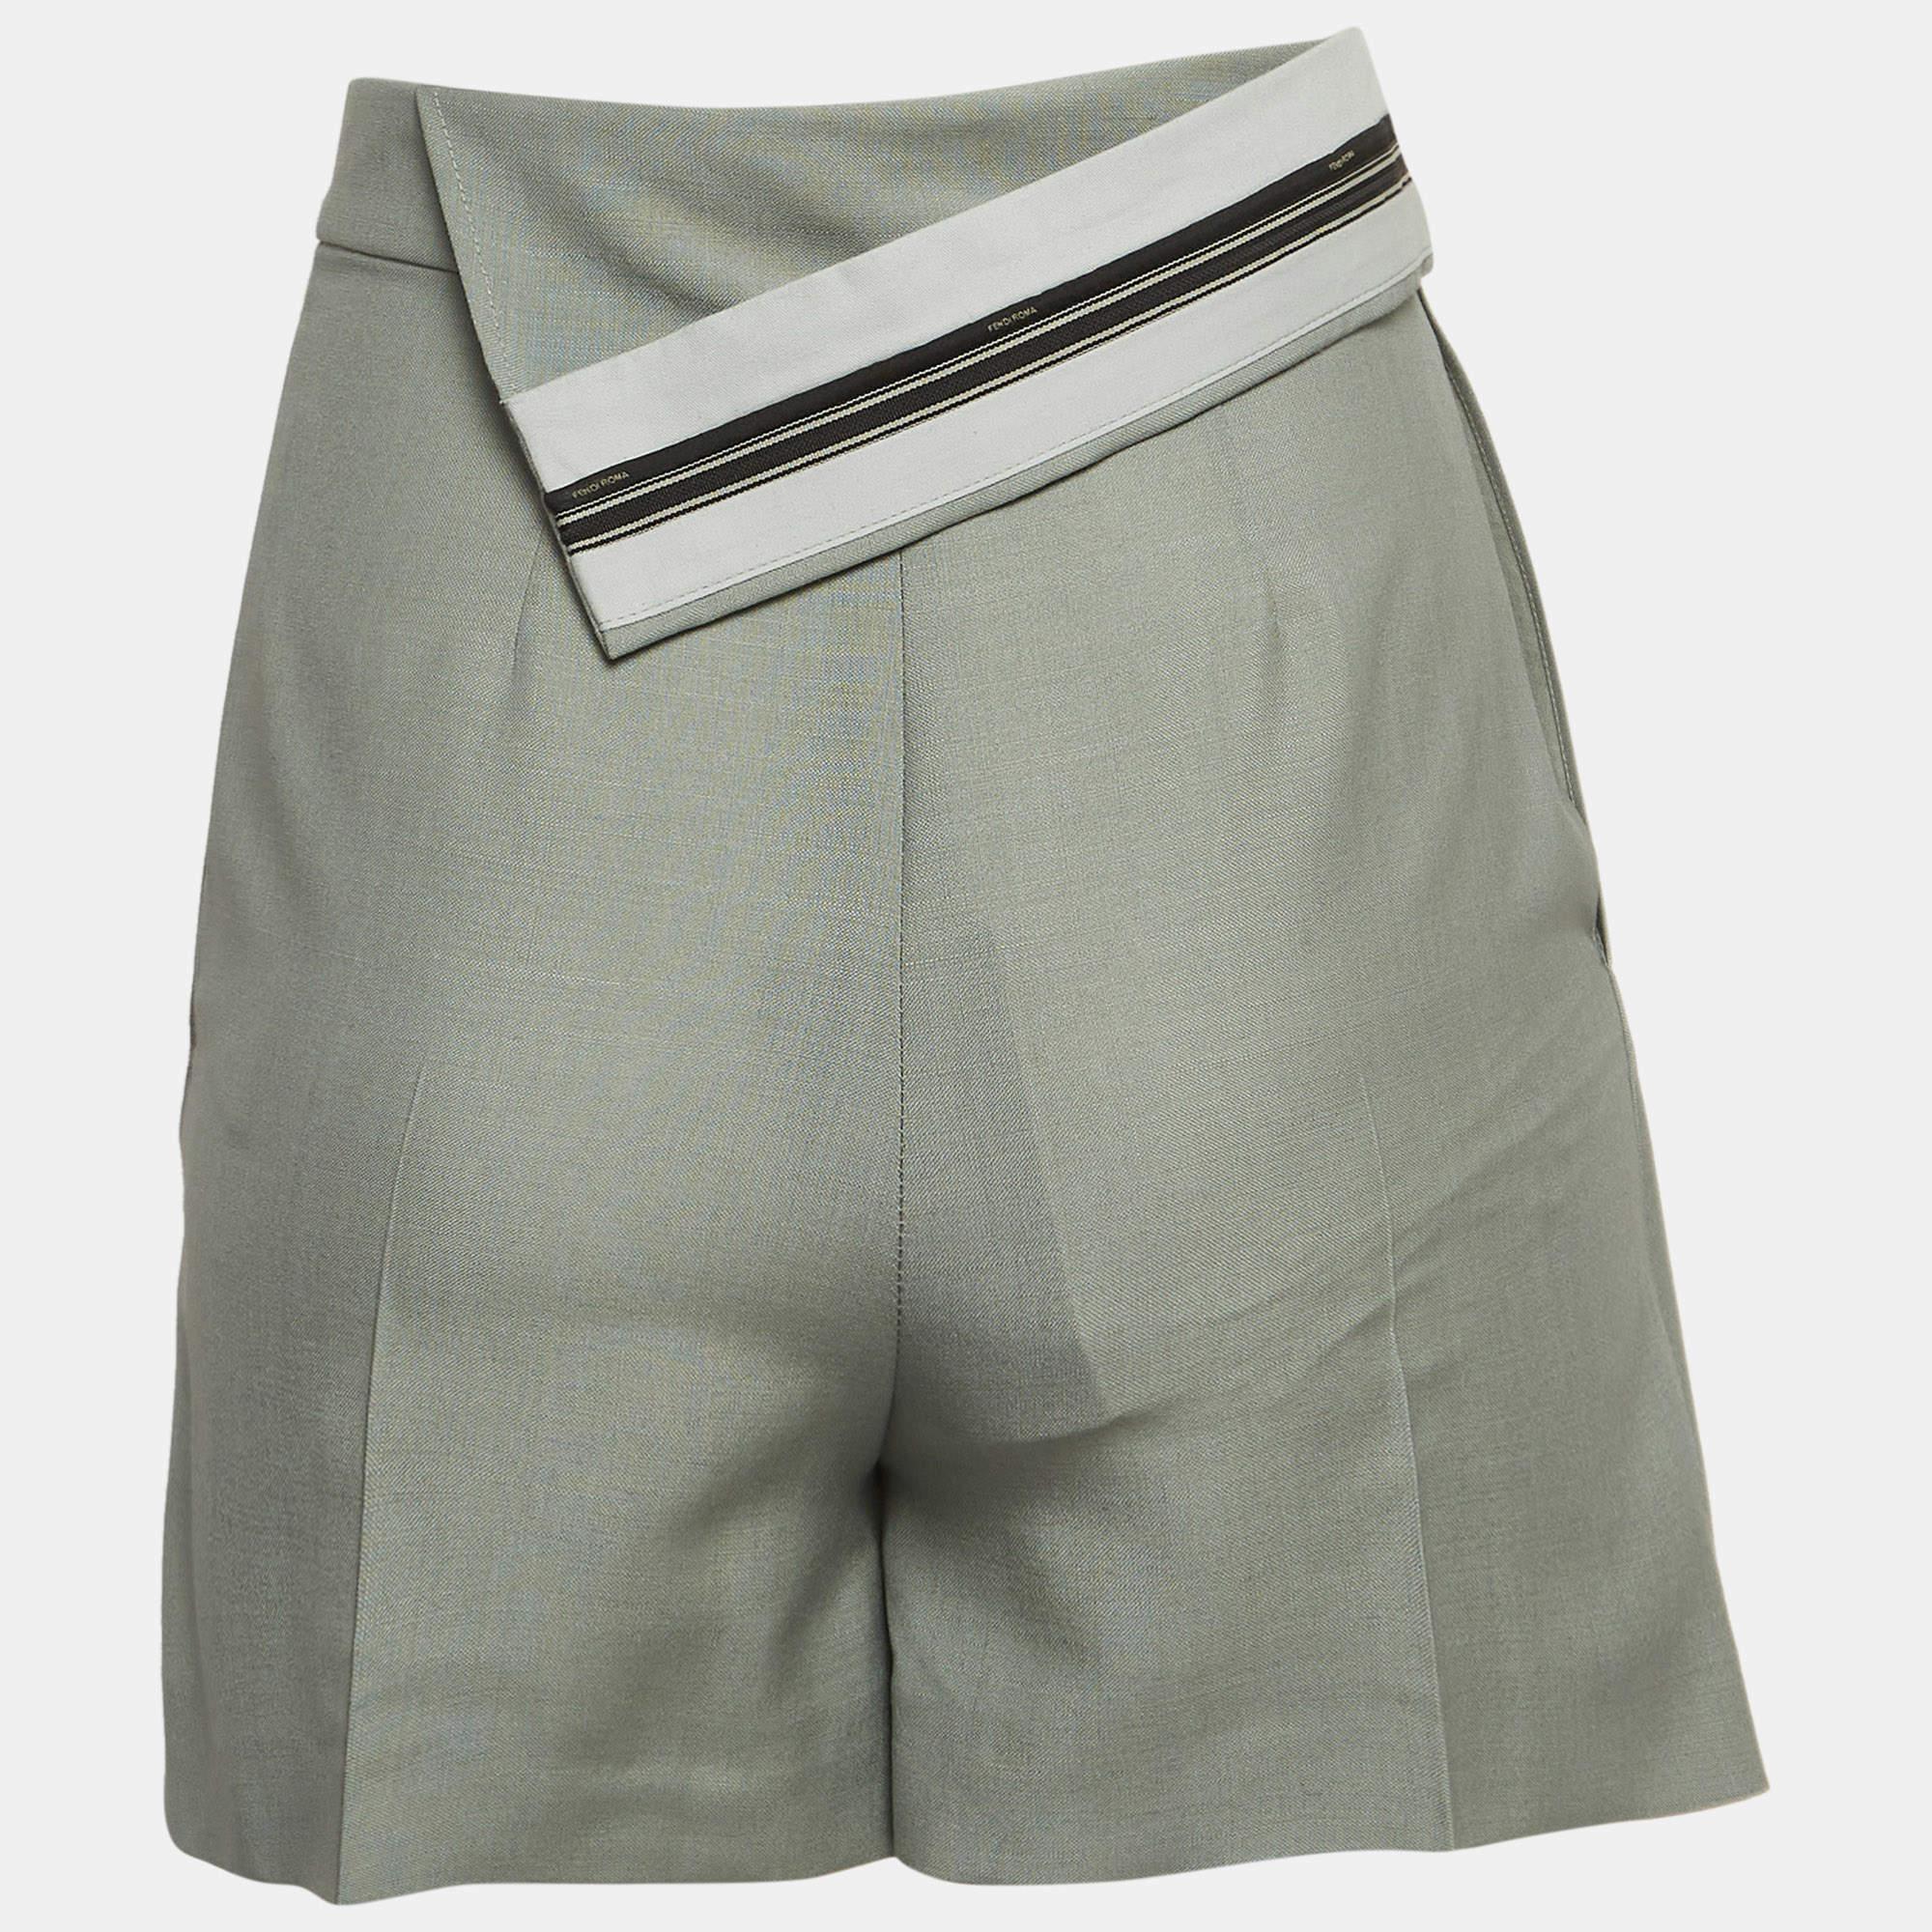 Crafted from luxurious grey mohair blend, these Fendi shorts exude modern charm with their asymmetric layered design. Soft yet structured, they offer comfort and style in equal measure. Perfect for adding a touch of contemporary flair to any